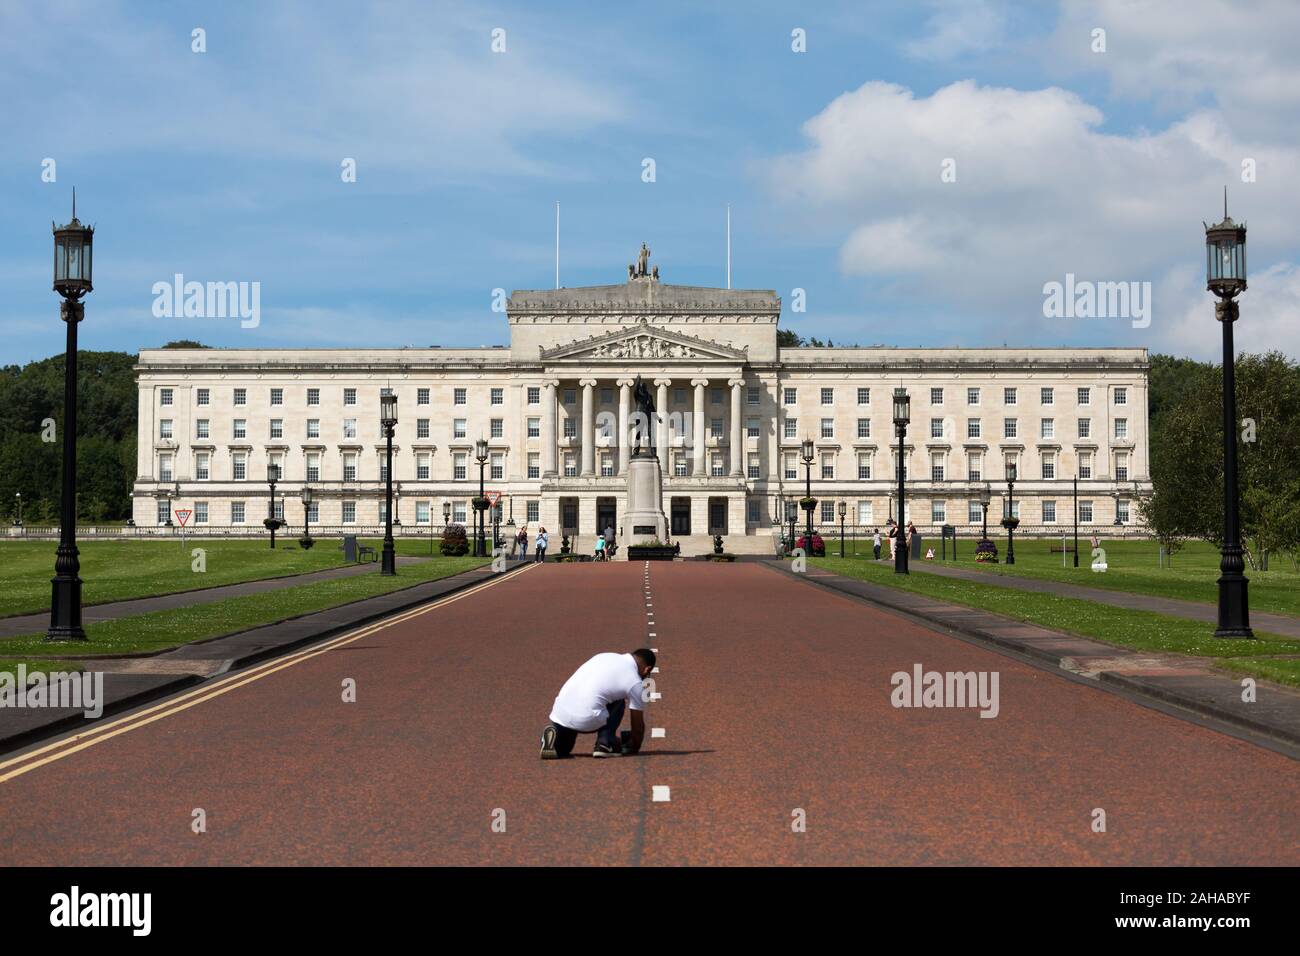 15.07.2019, Belfast, Northern Ireland, Great Britain - Stormont Castle, seat of the Northern Ireland Assembly and government of Northern Ireland, when Stock Photo